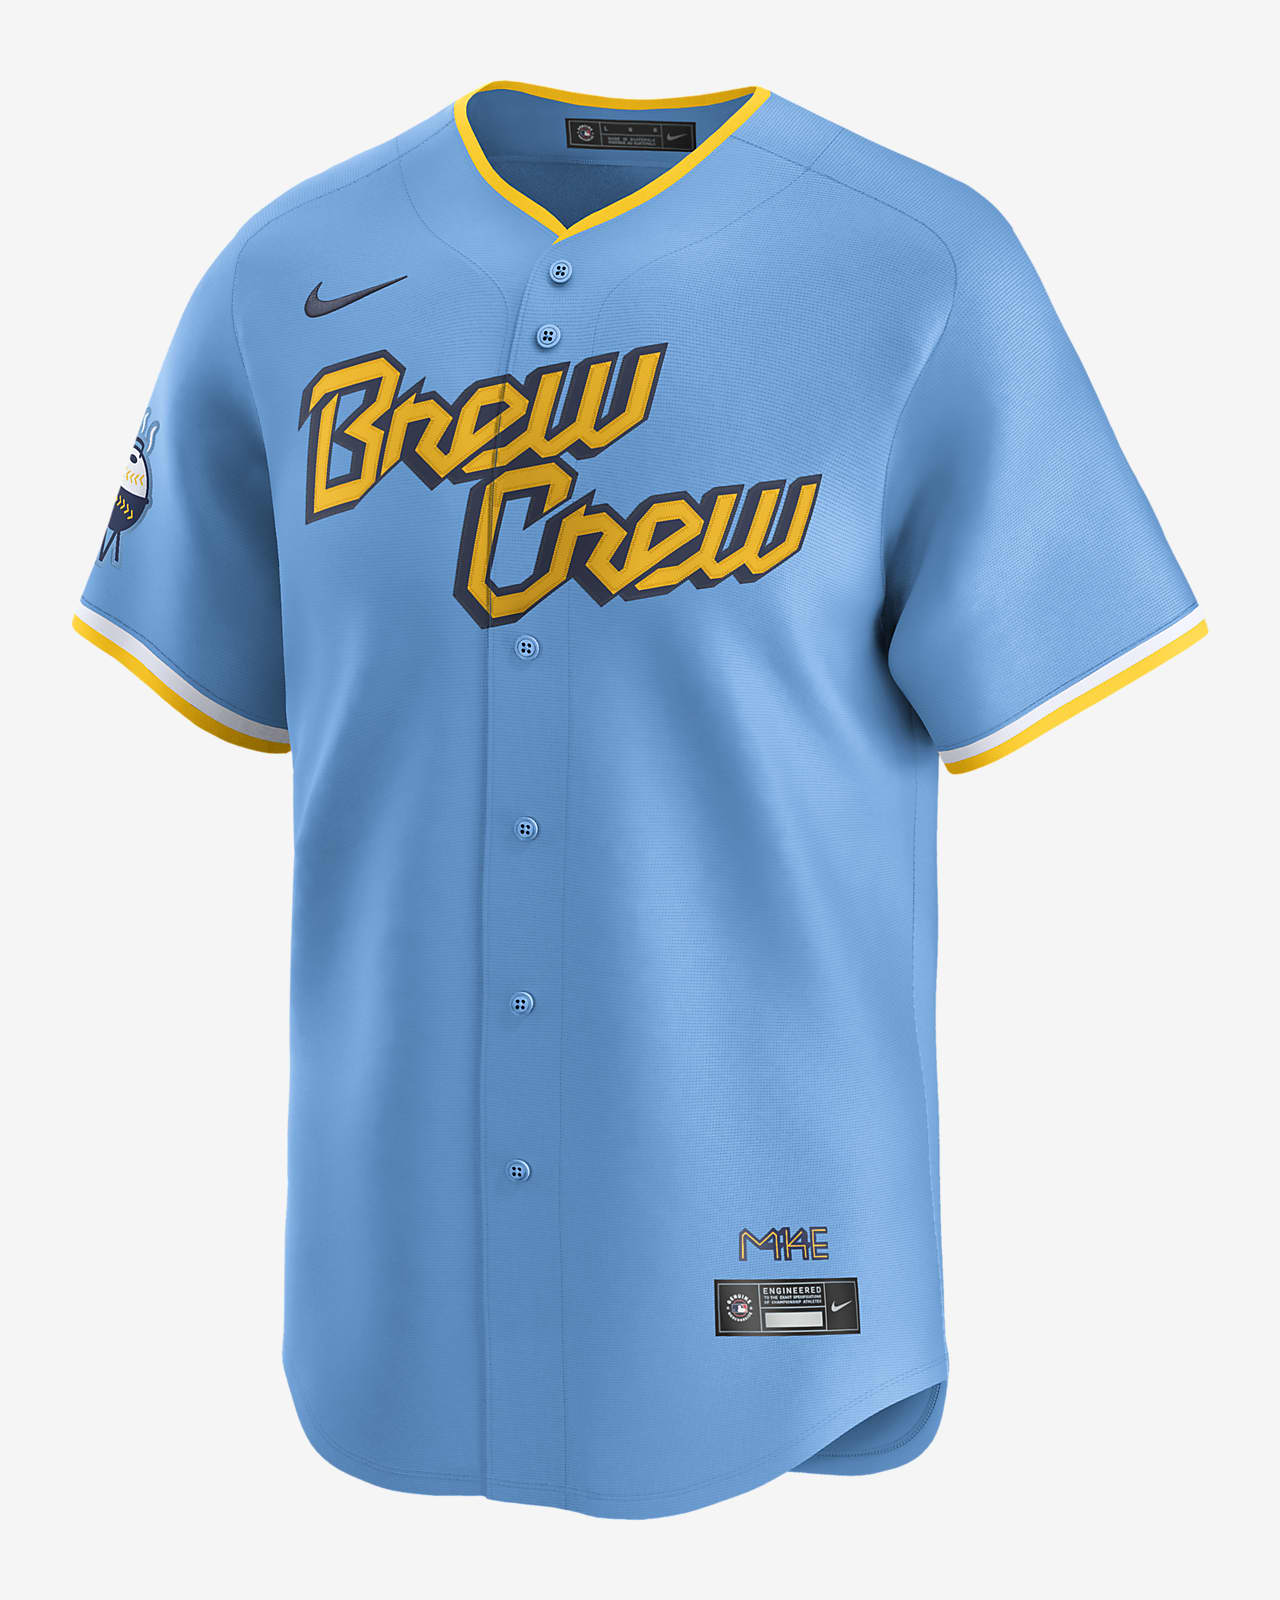 Jersey Nike Dri-FIT ADV de la MLB Limited para hombre Willy Adames Milwaukee Brewers City Connect